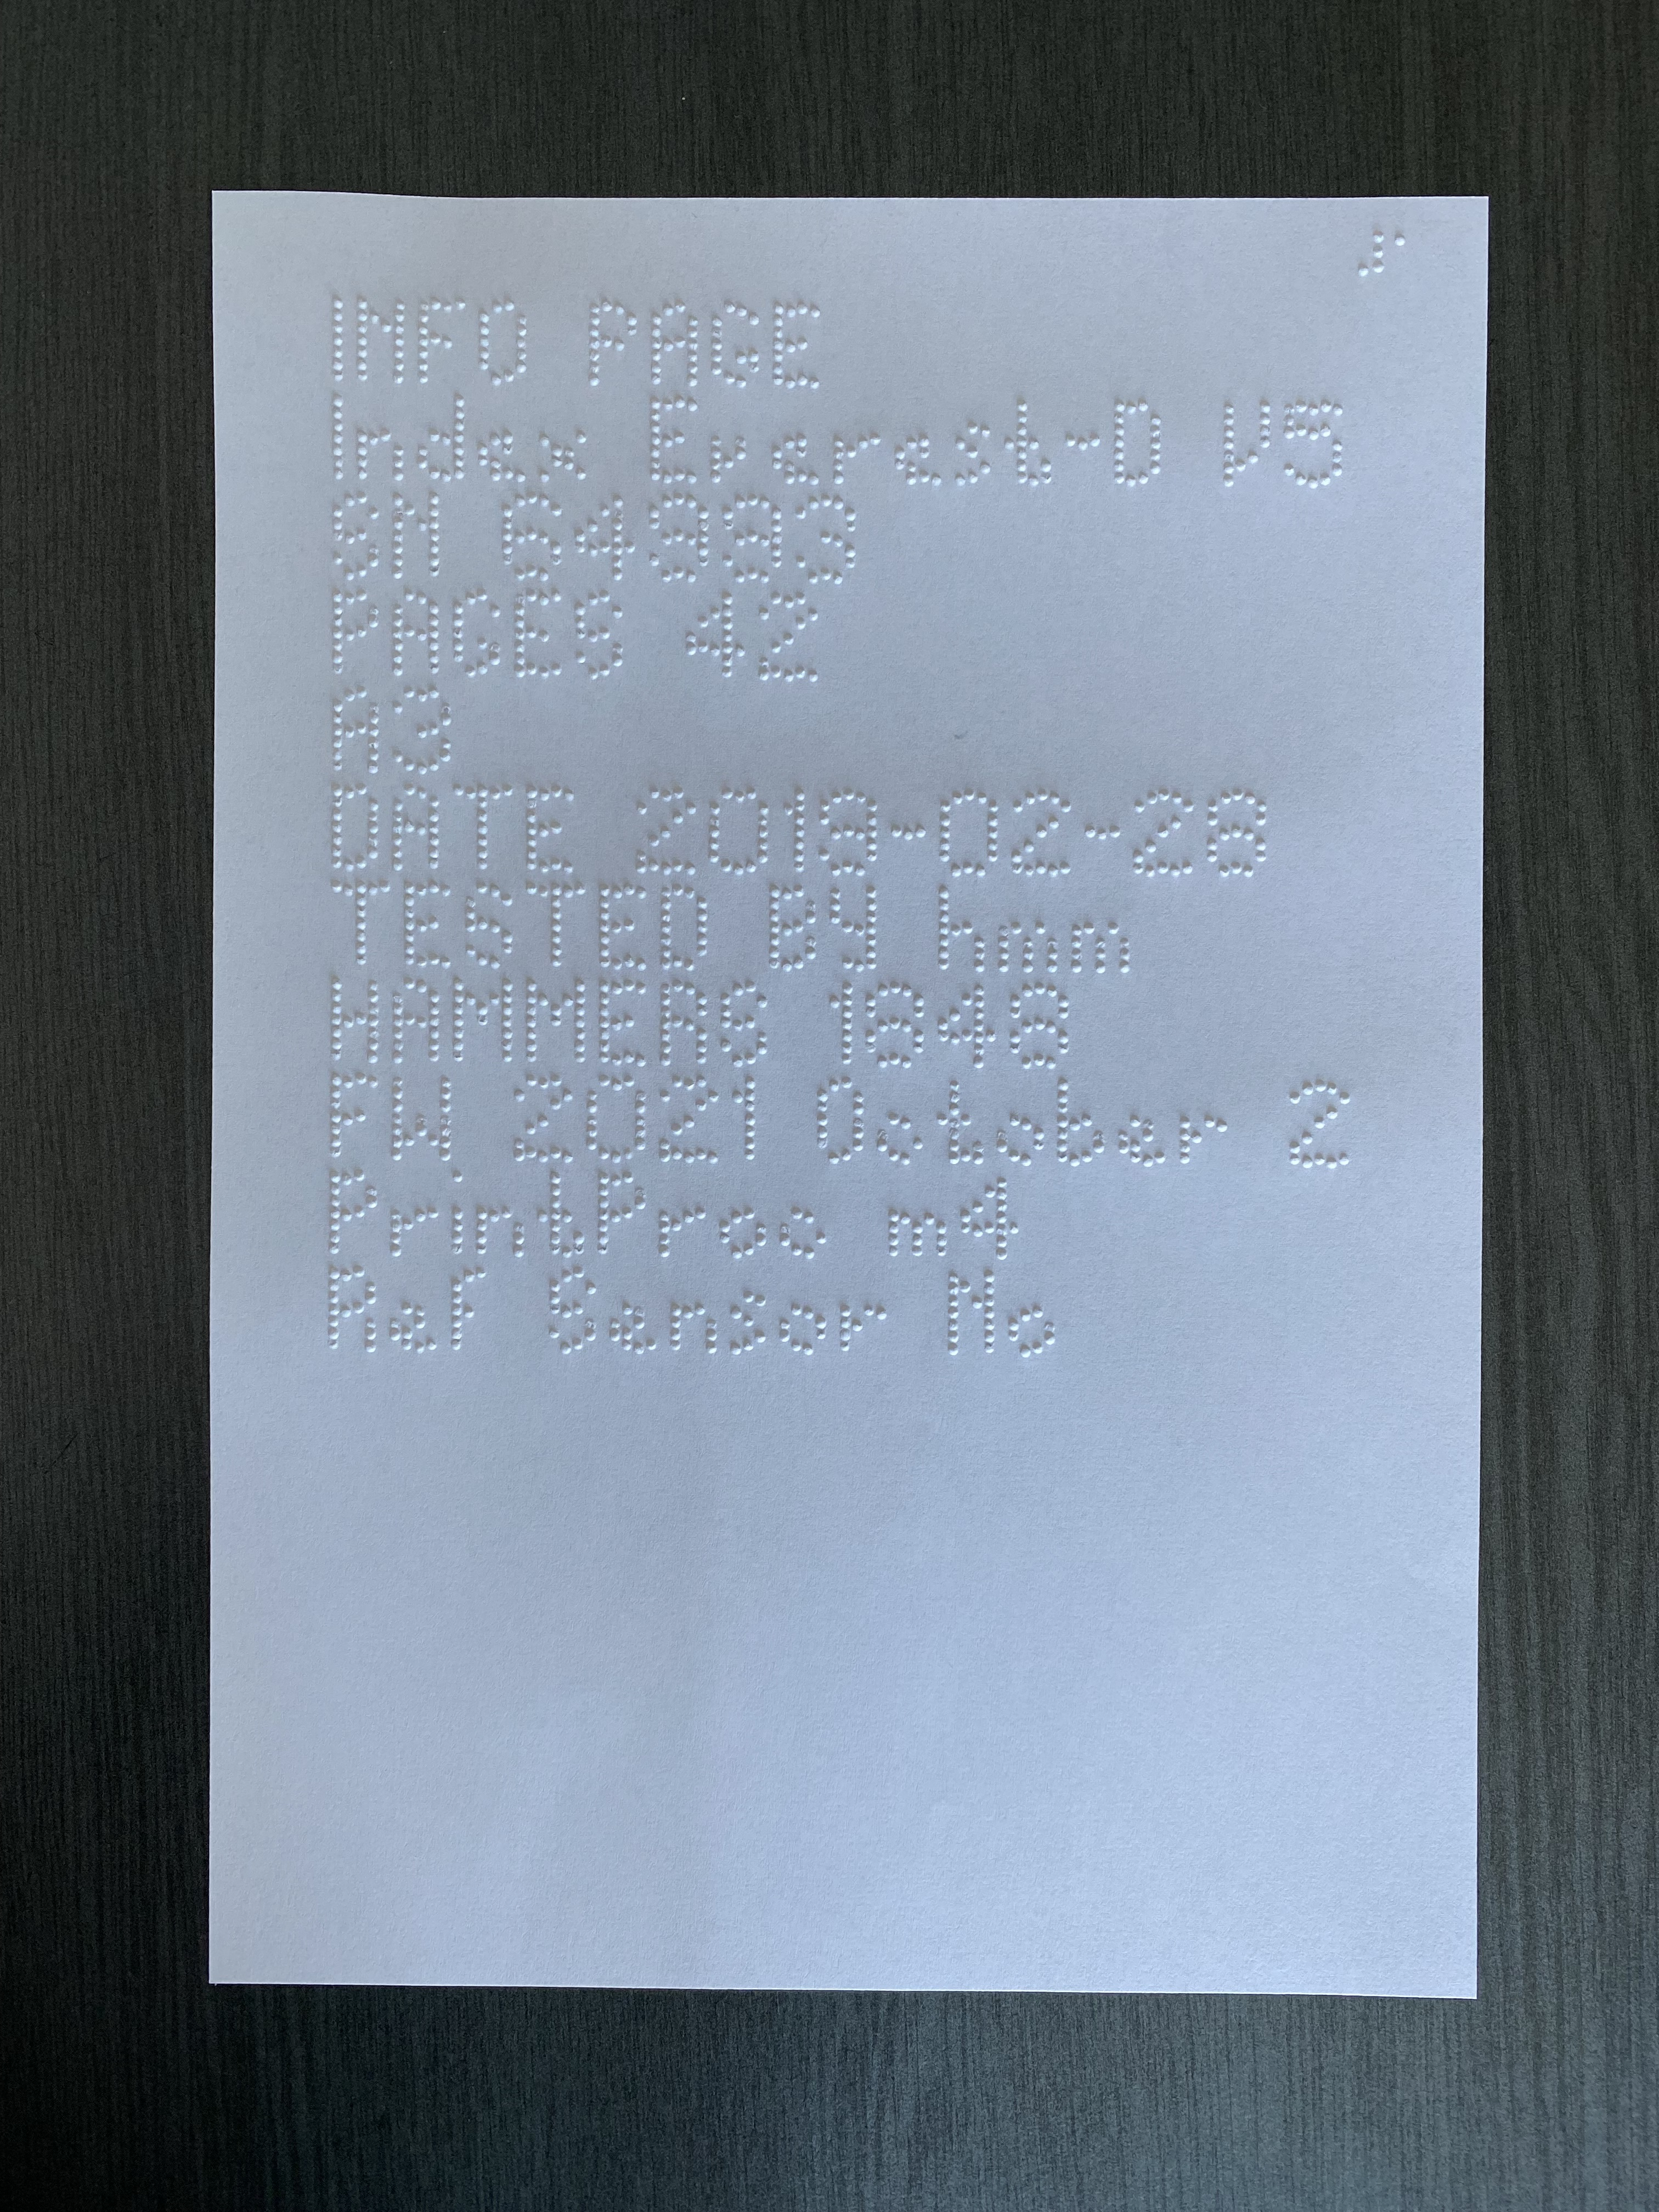 Braille text printed on paper